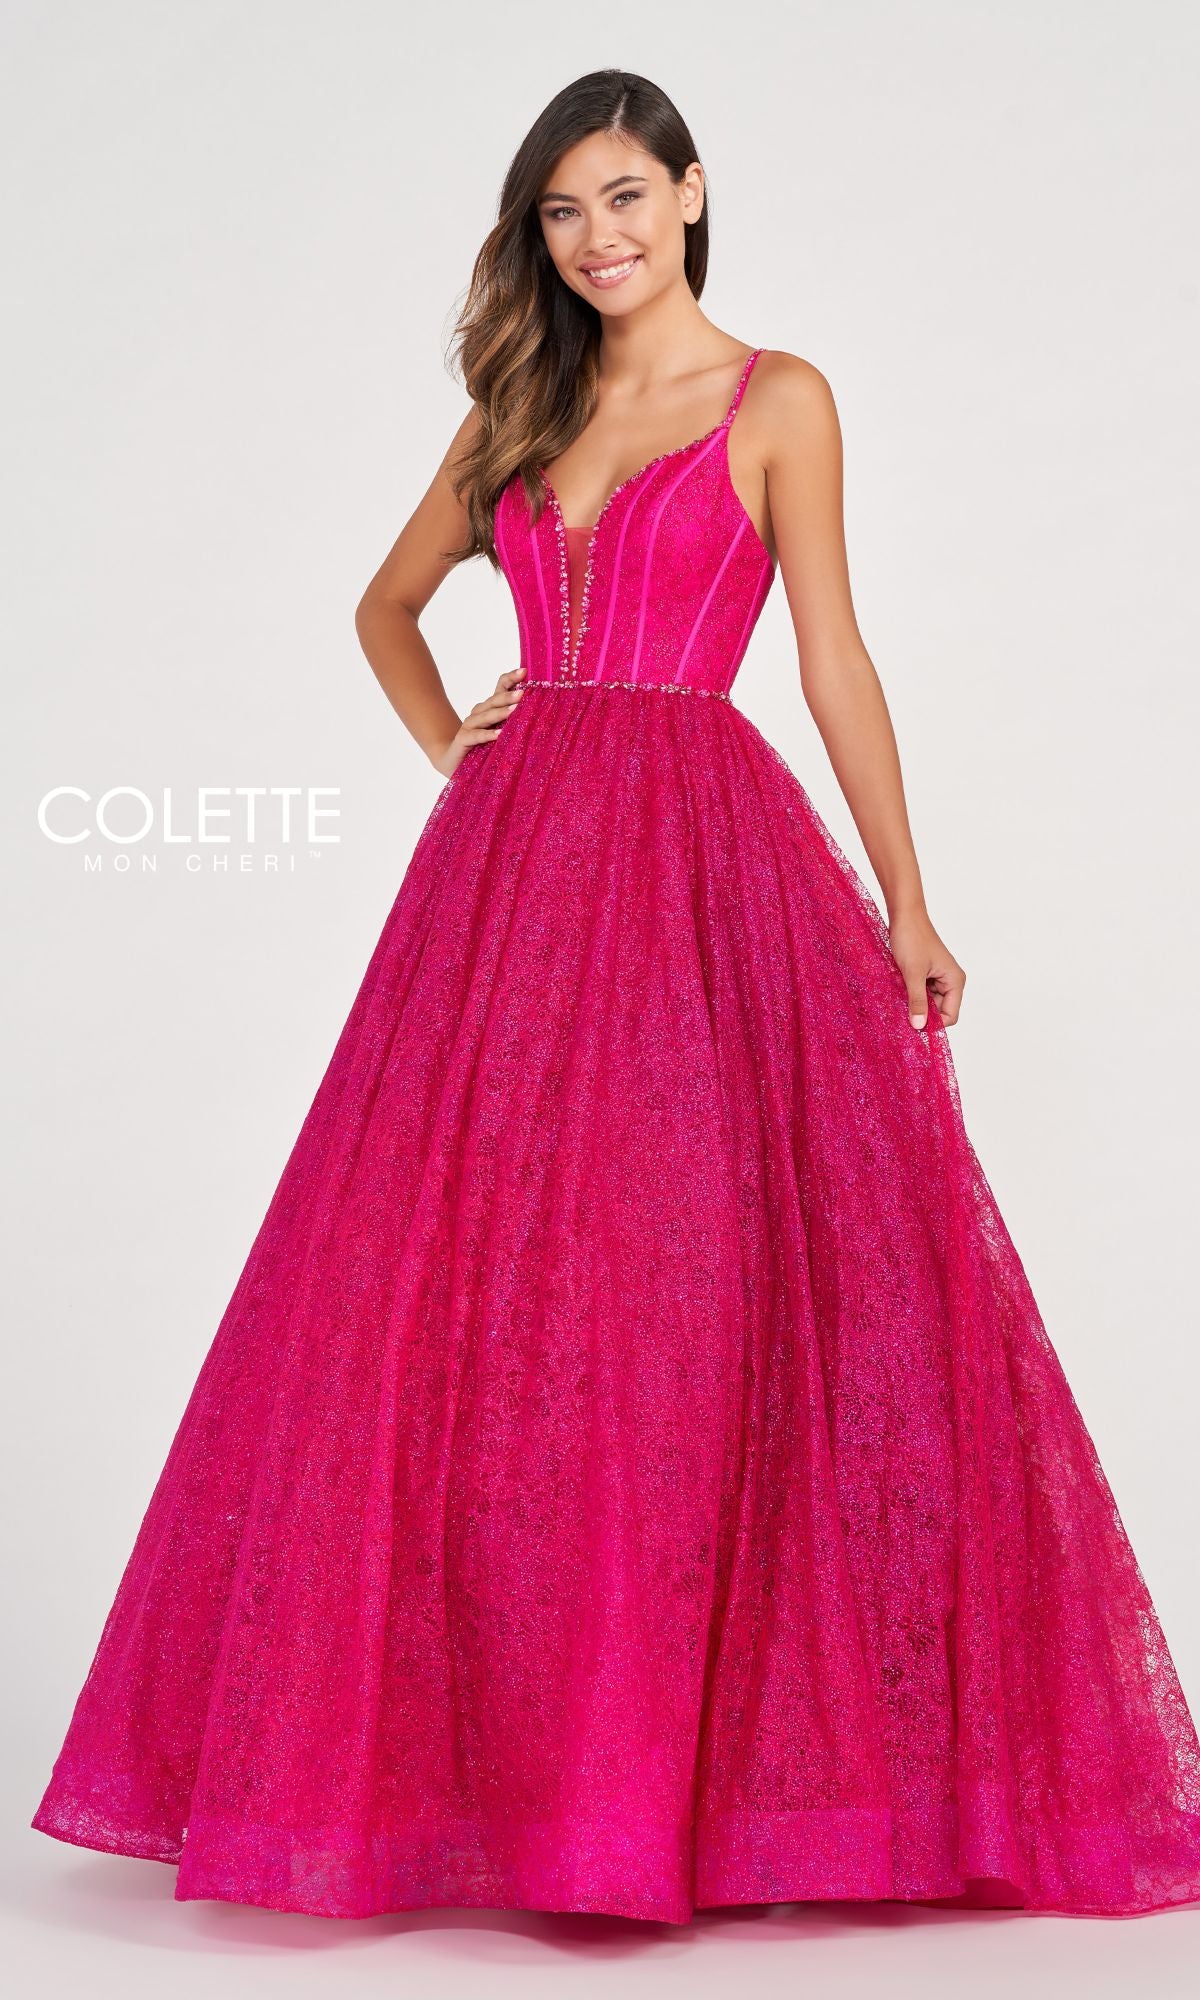 Colette CL2018 Long Glitter-Lace Ball Gown - PromGirl